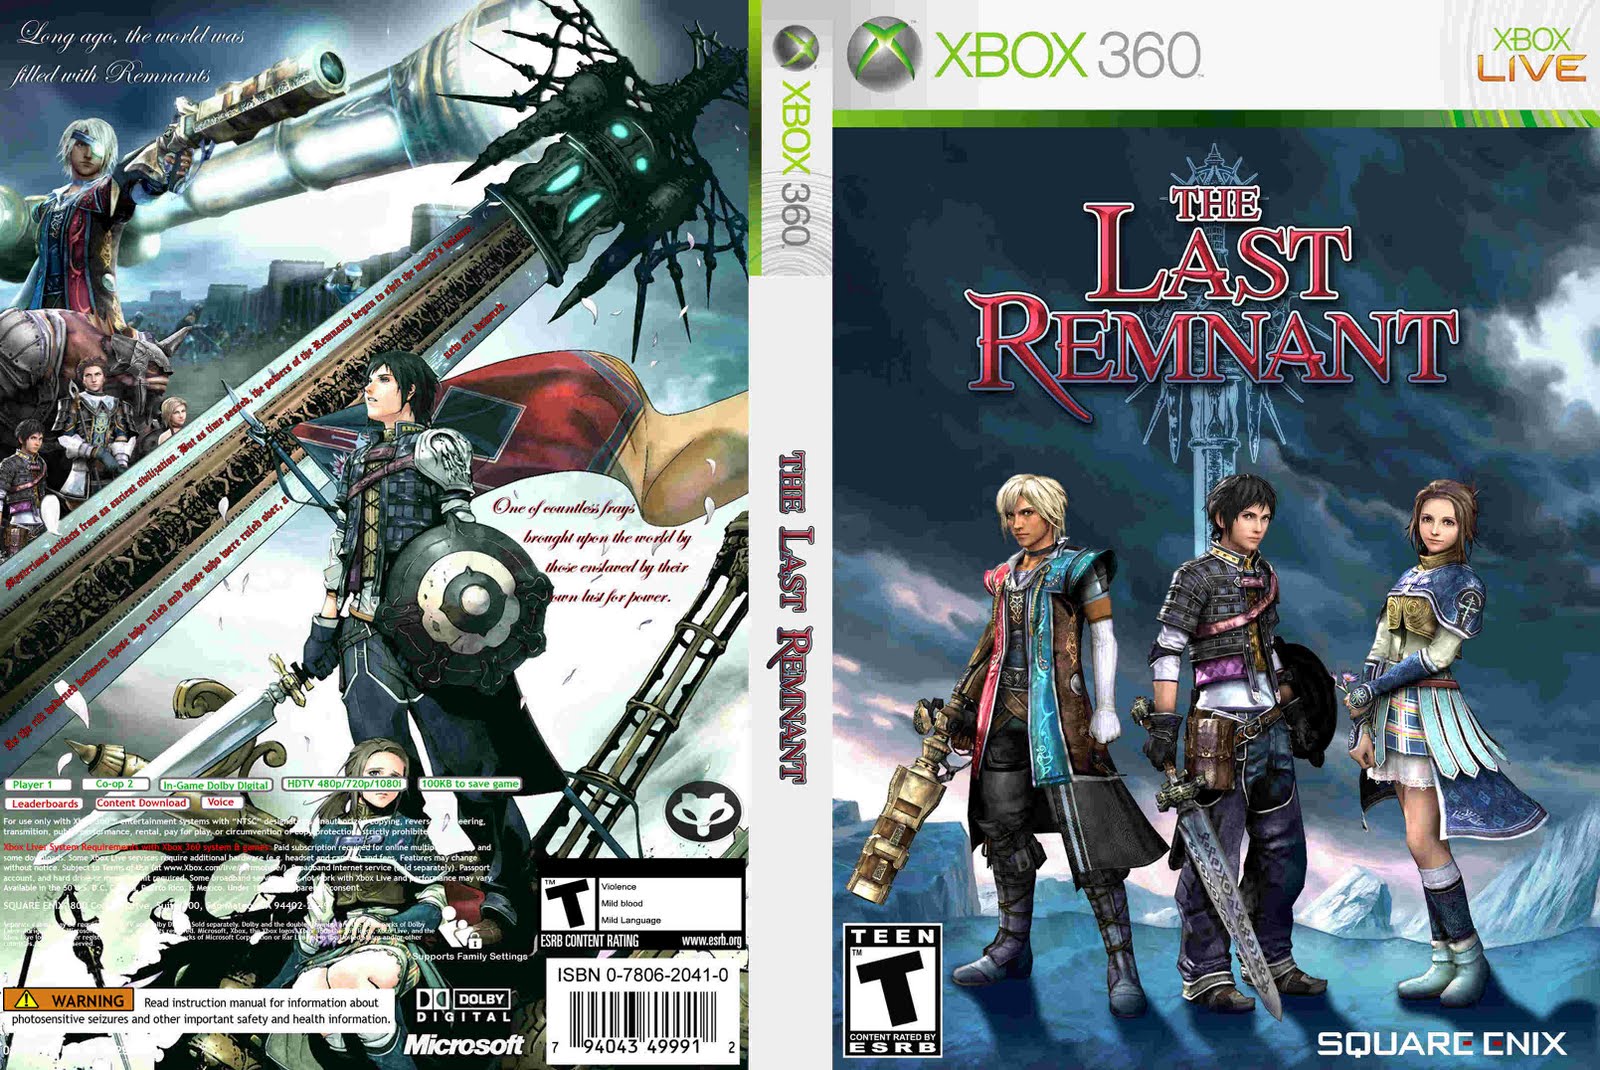 The last remnant steam фото 99